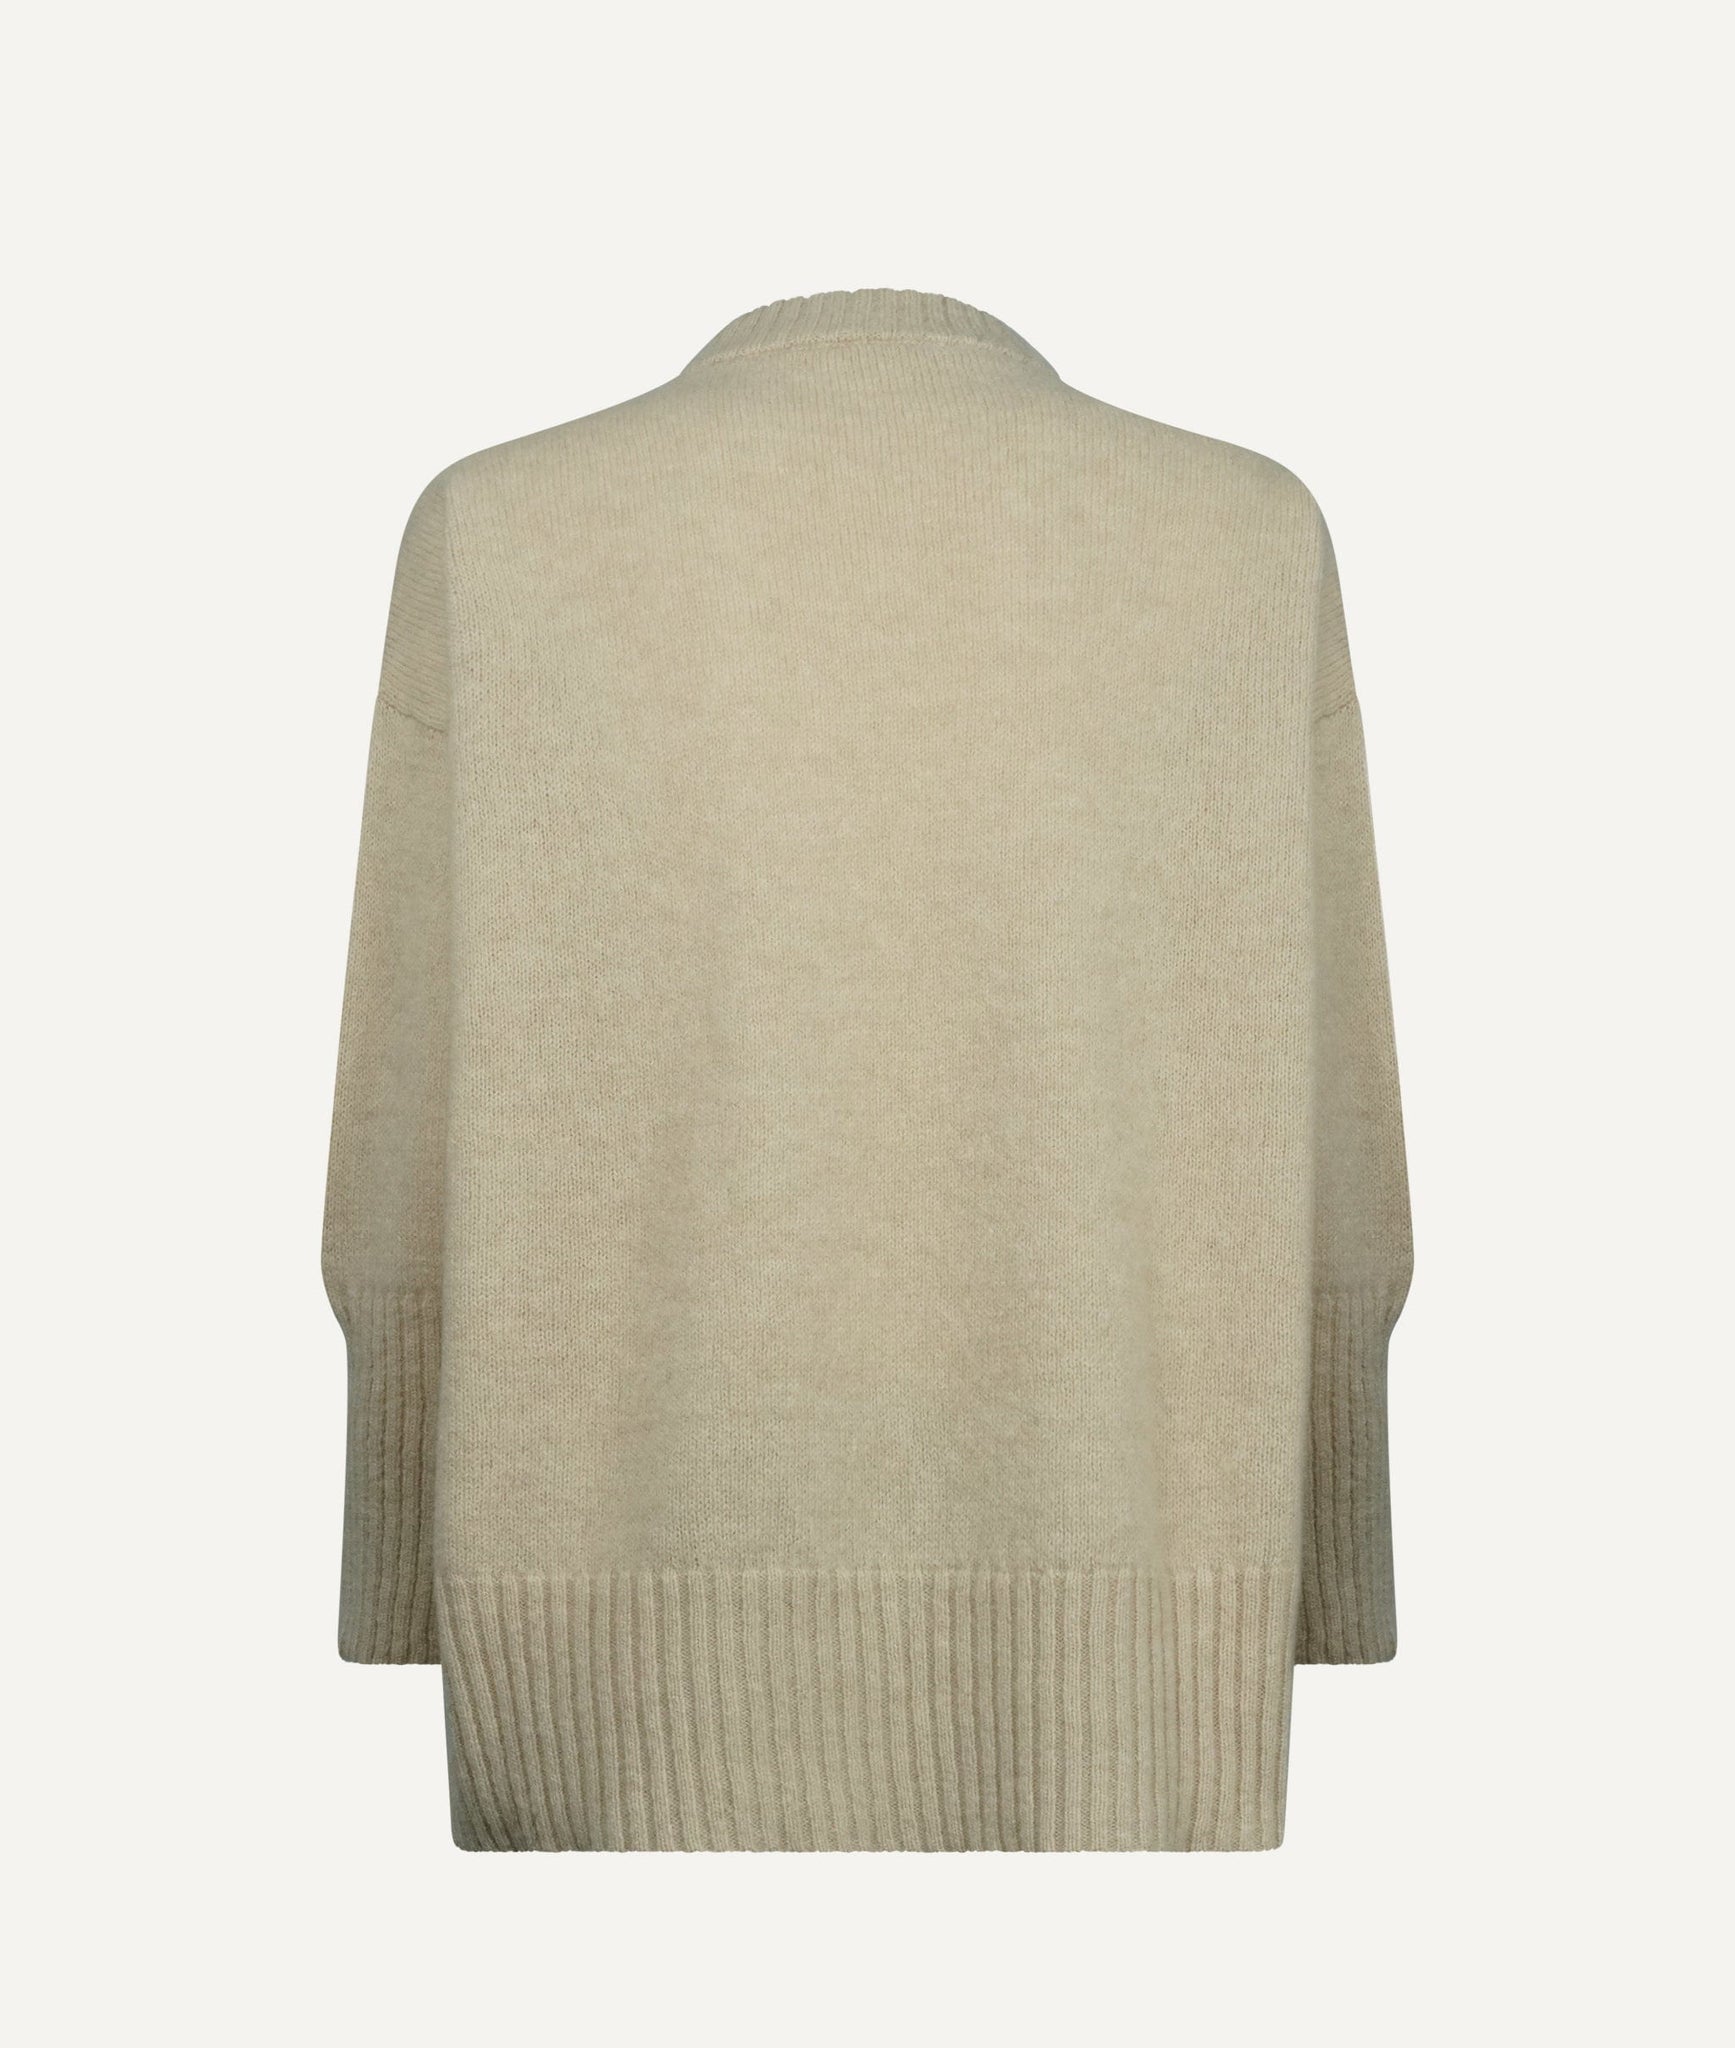 Fedeli - Roundneck in Wool & Cashmere